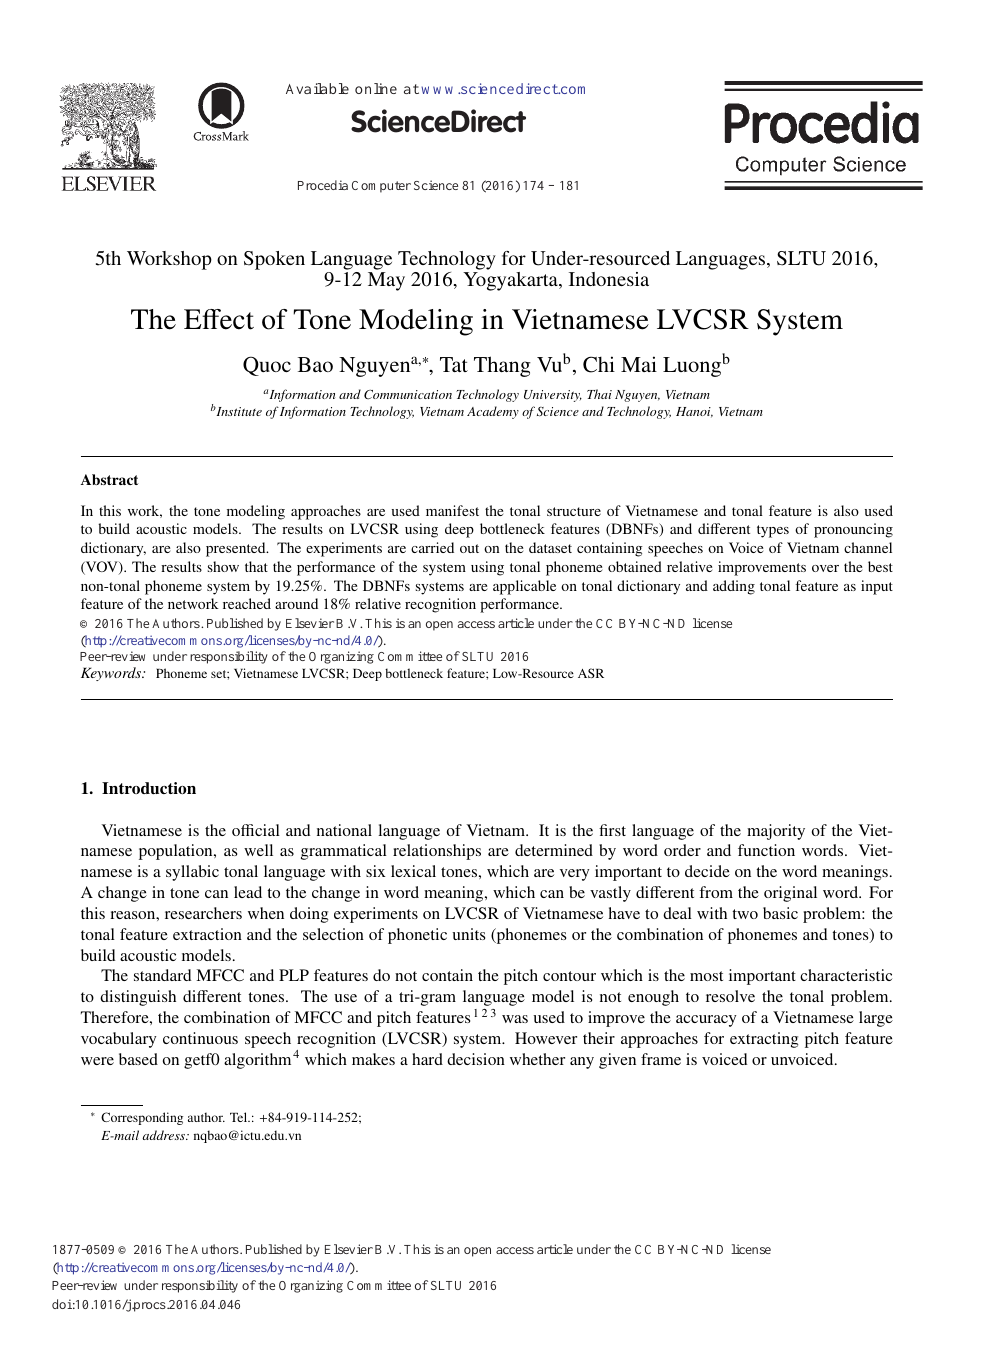 The Effect Of Tone Modeling In Vietnamese Lvcsr System Topic Of Research Paper In Computer And Information Sciences Download Scholarly Article Pdf And Read For Free On Cyberleninka Open Science Hub